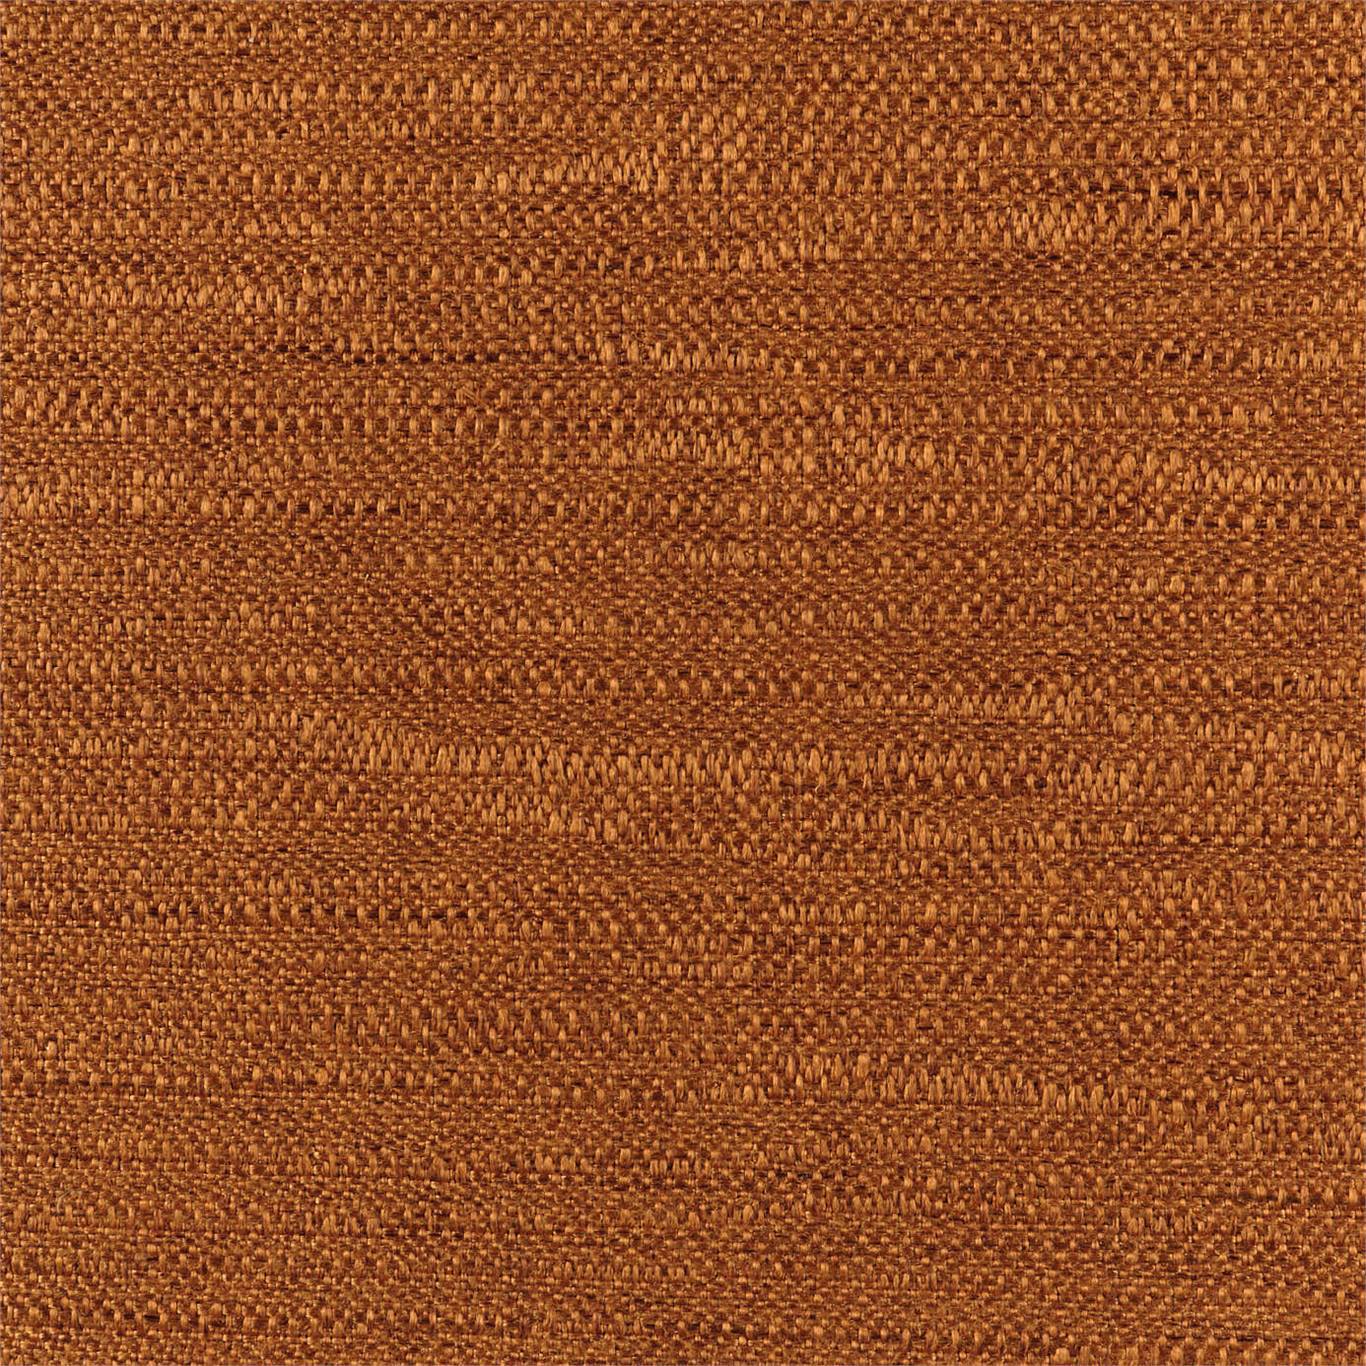 Extensive Rust Fabric by HAR